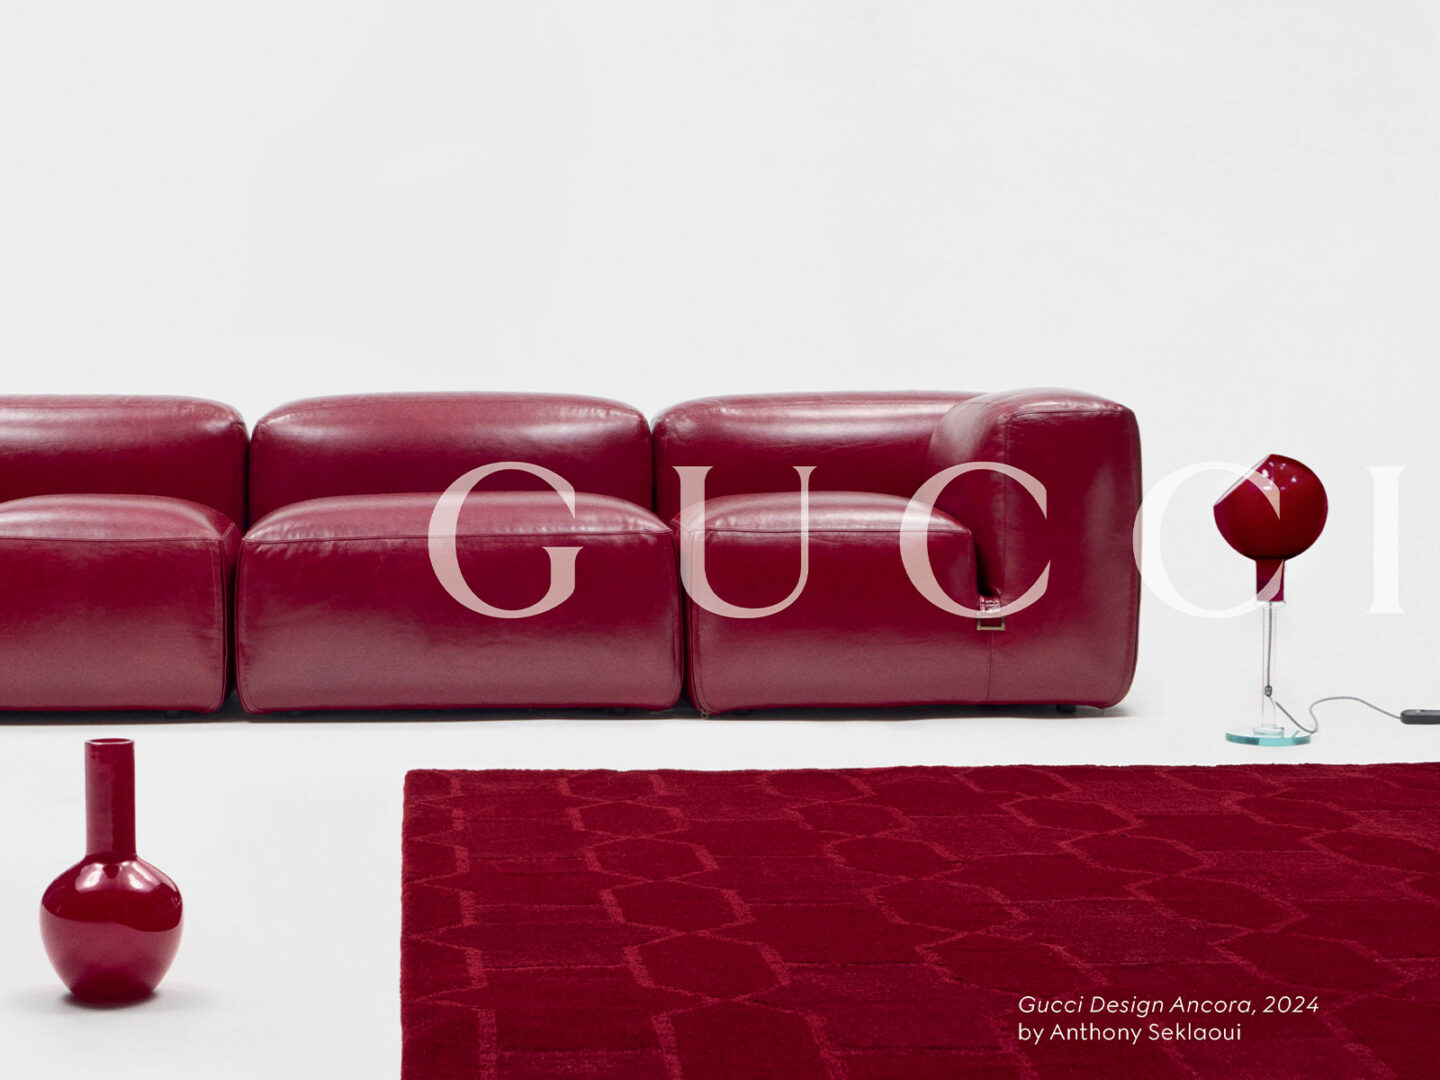 These are the 5 design icons presented by Gucci Design Ancora